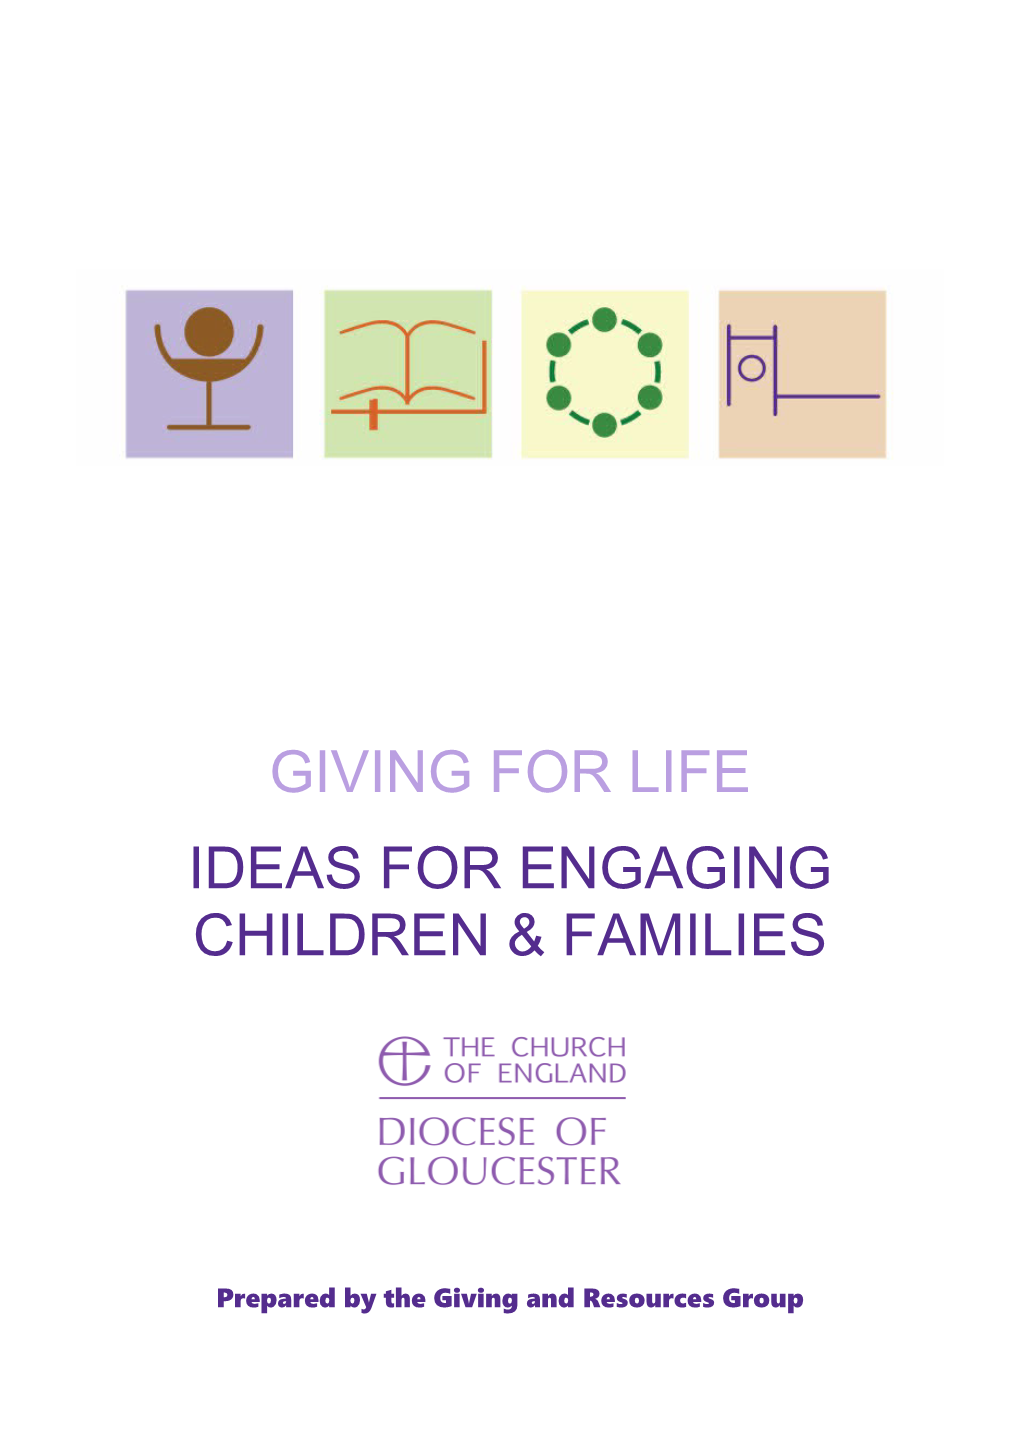 Creative Ideas for Engaging Children and Families in Giving